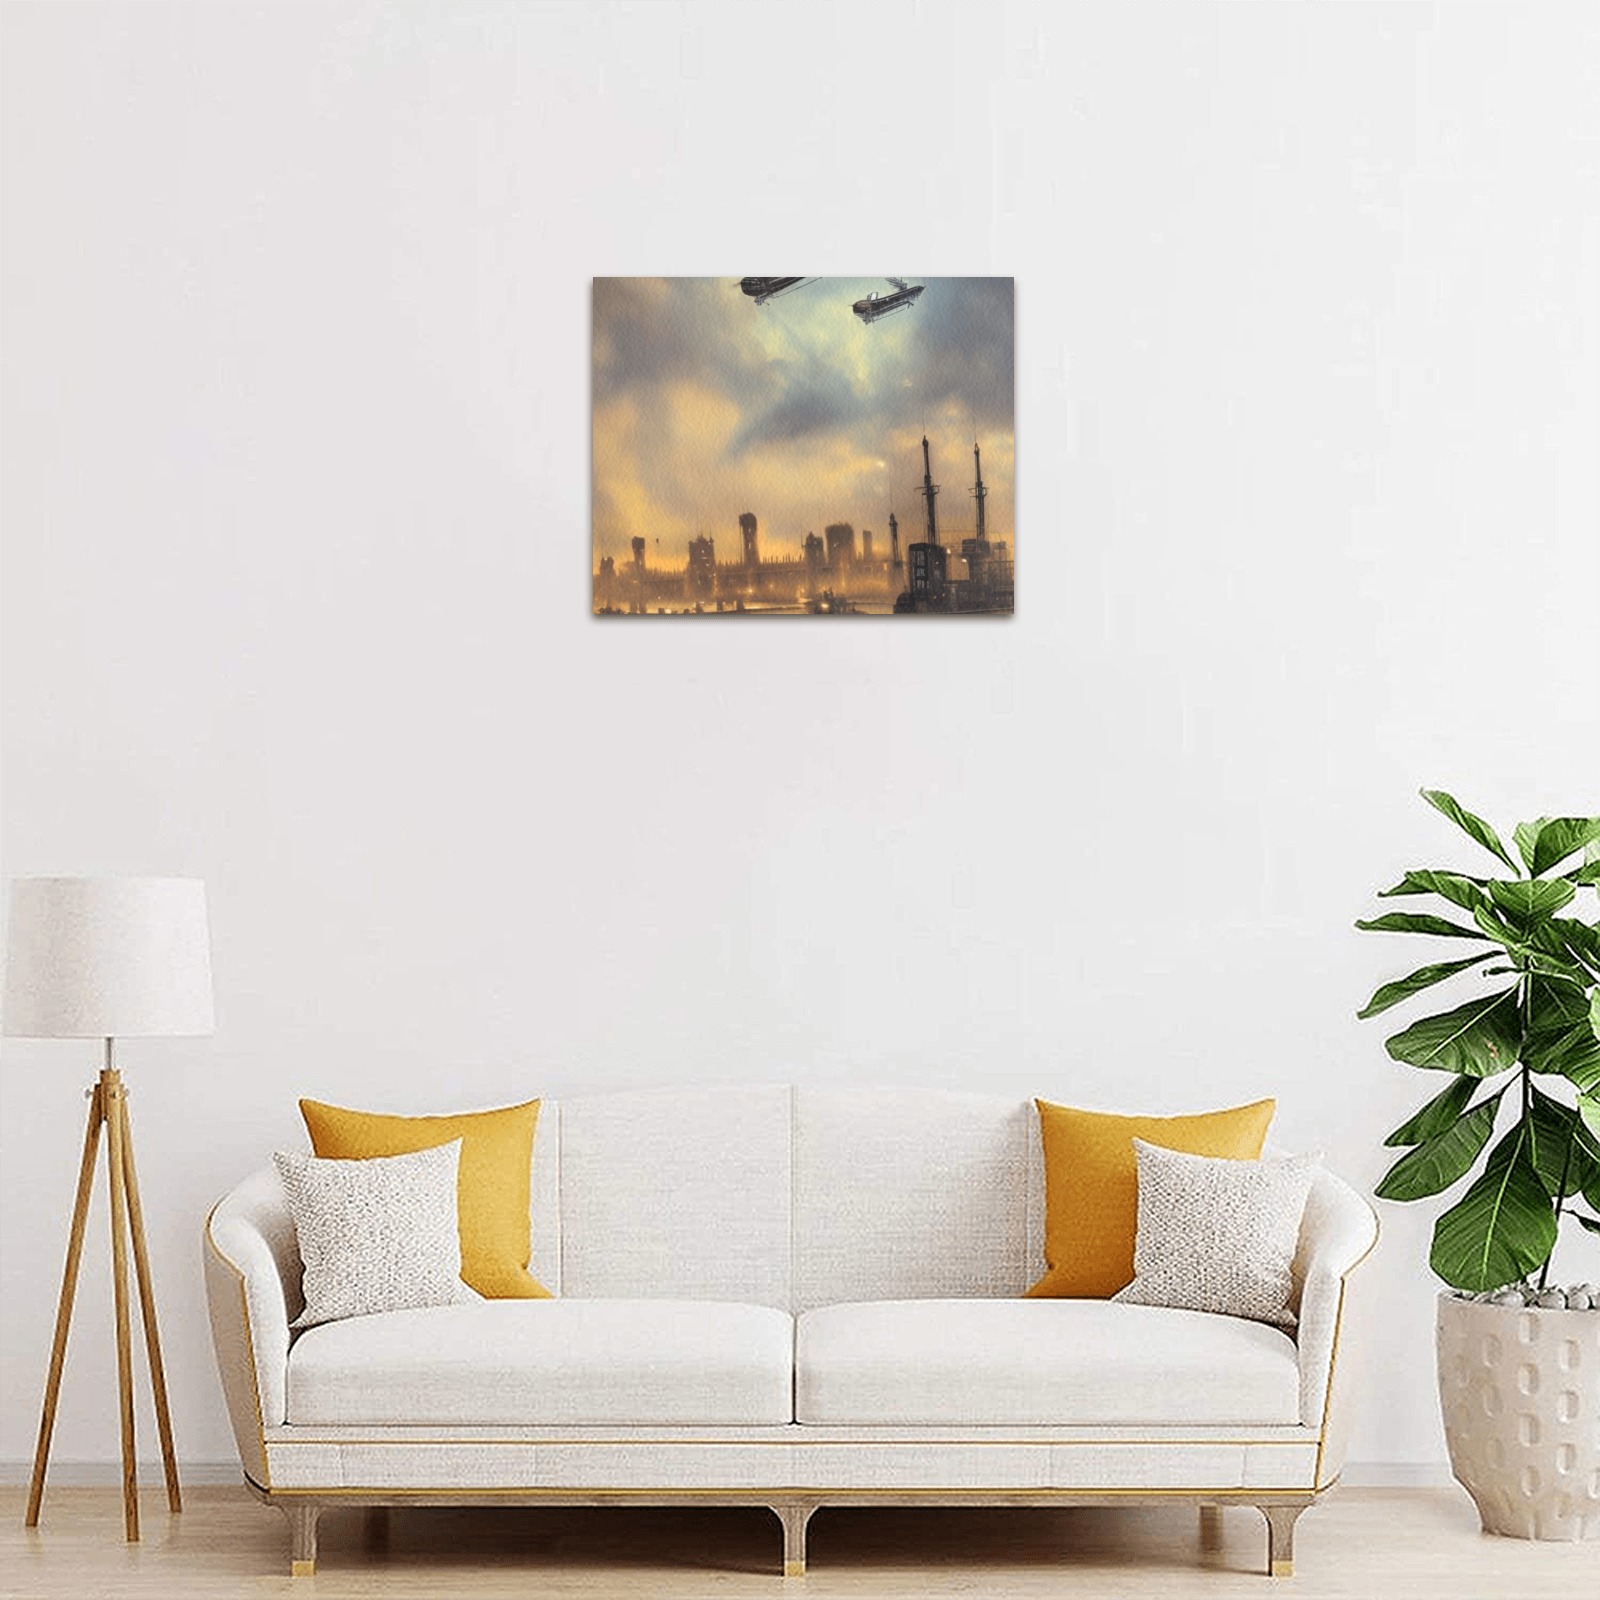 BATTLE OVER LONDON 3 Upgraded Canvas Print 10"x8"